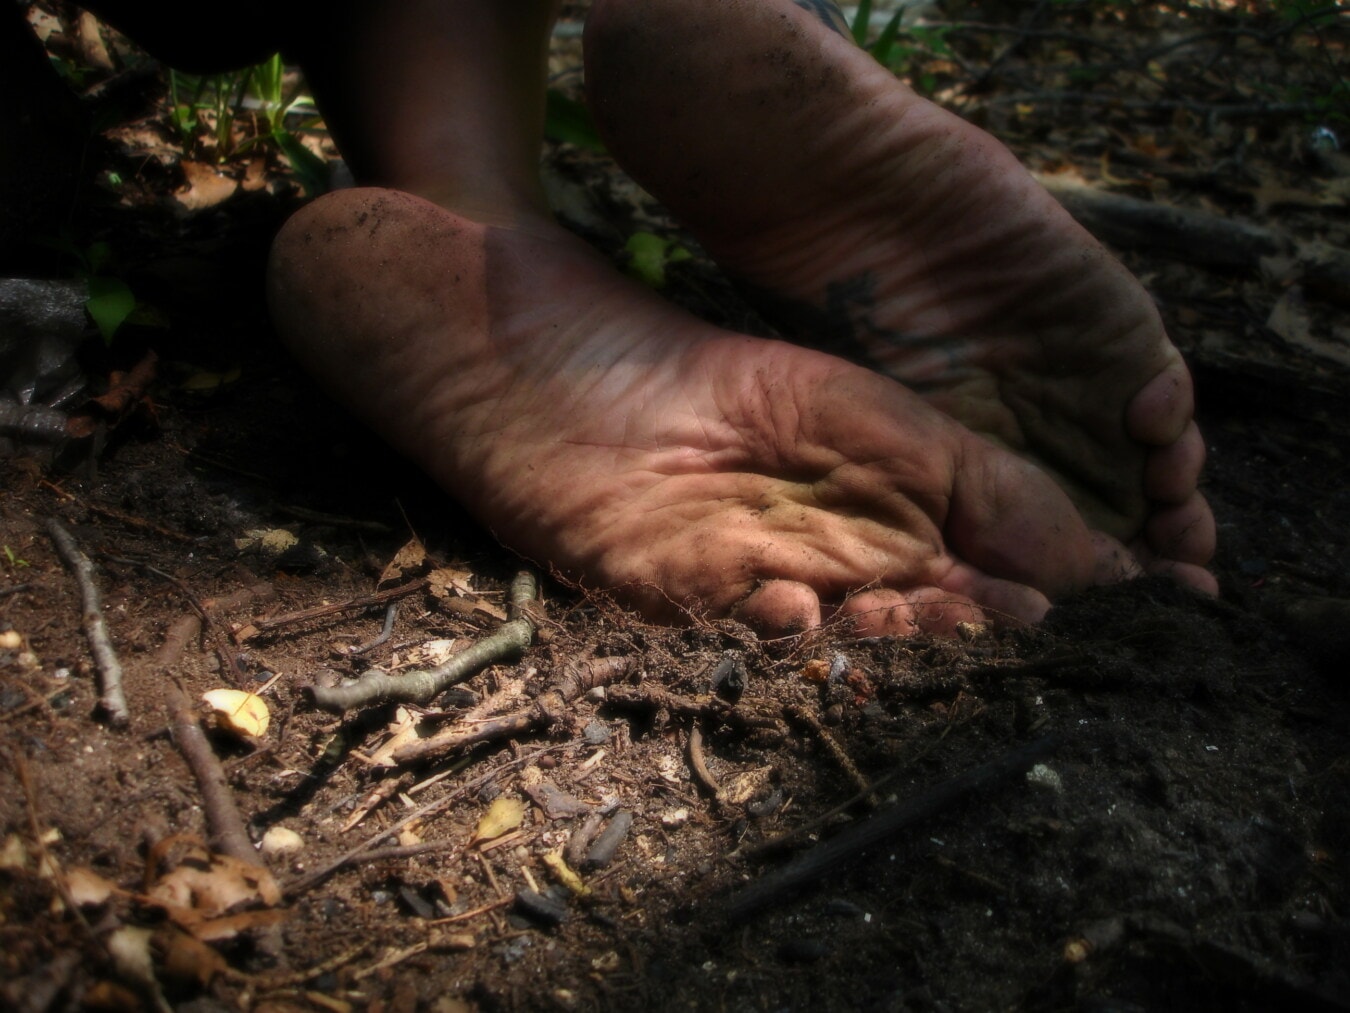 caucasian, barefoot, roots, dirty, feet, ground squirrel, ground, soil, dirt, foot